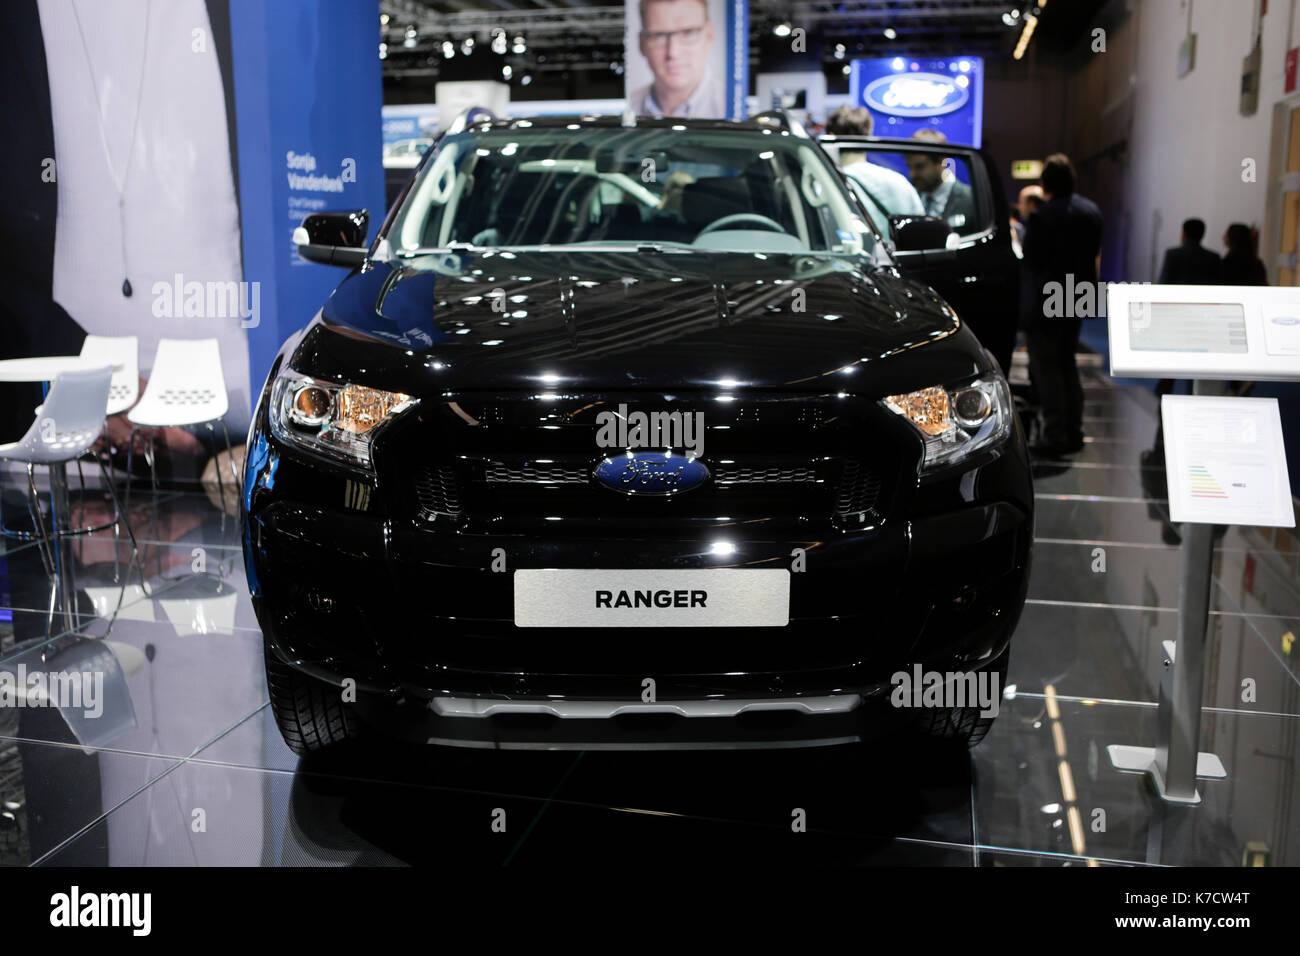 The American car manufacturer Ford Motor Company presents the Ford Ranger Black Edition Limited at the 67. IAA. The 67. Internationale Automobil-Ausstellung (IAA) opened in Frankfurt for trade visitors. It is with over 1000 exhibitors one of the largest Motor Shows in the world. The show will open for the general public on the 16th September. (Photo by Michael Debets/Pacific Press) Stock Photo